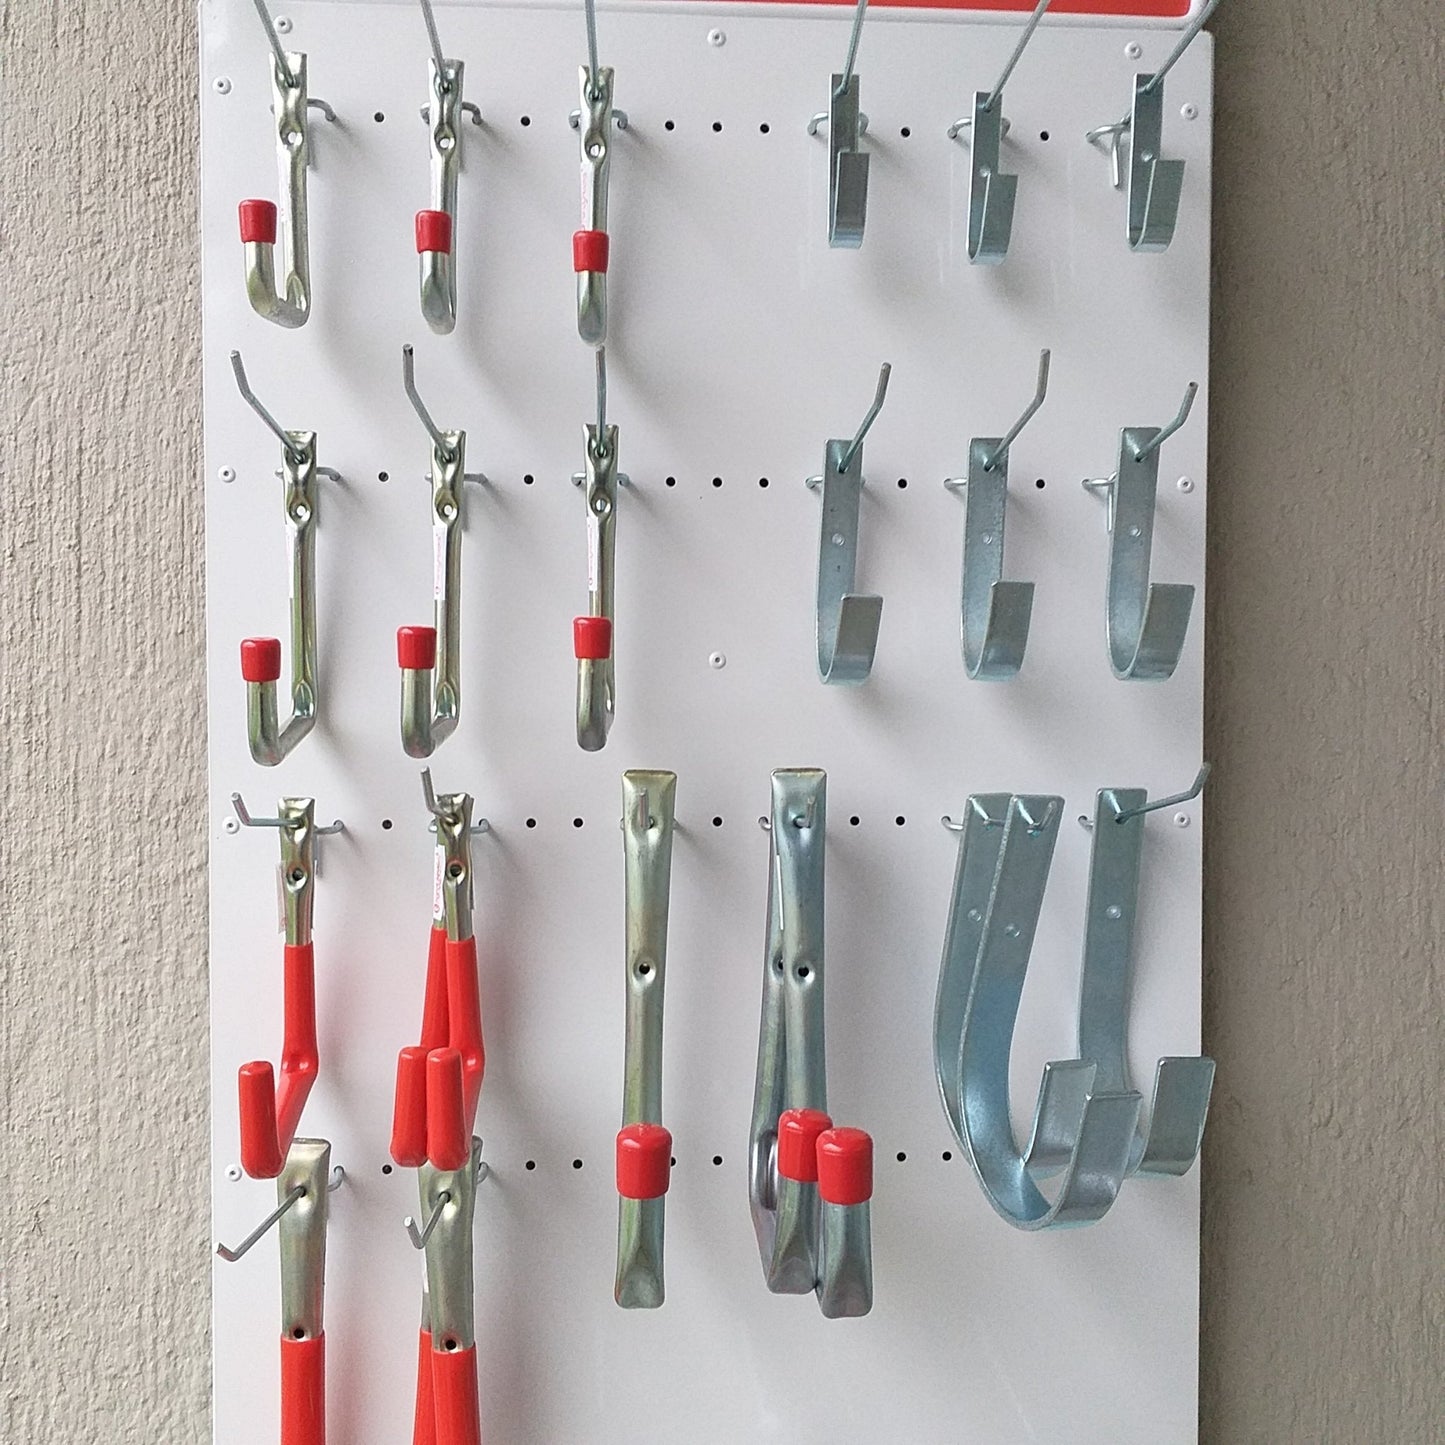 Handy Hooks - Flat Steel Curved Hooks - The easy to install storage solution - Lifespace